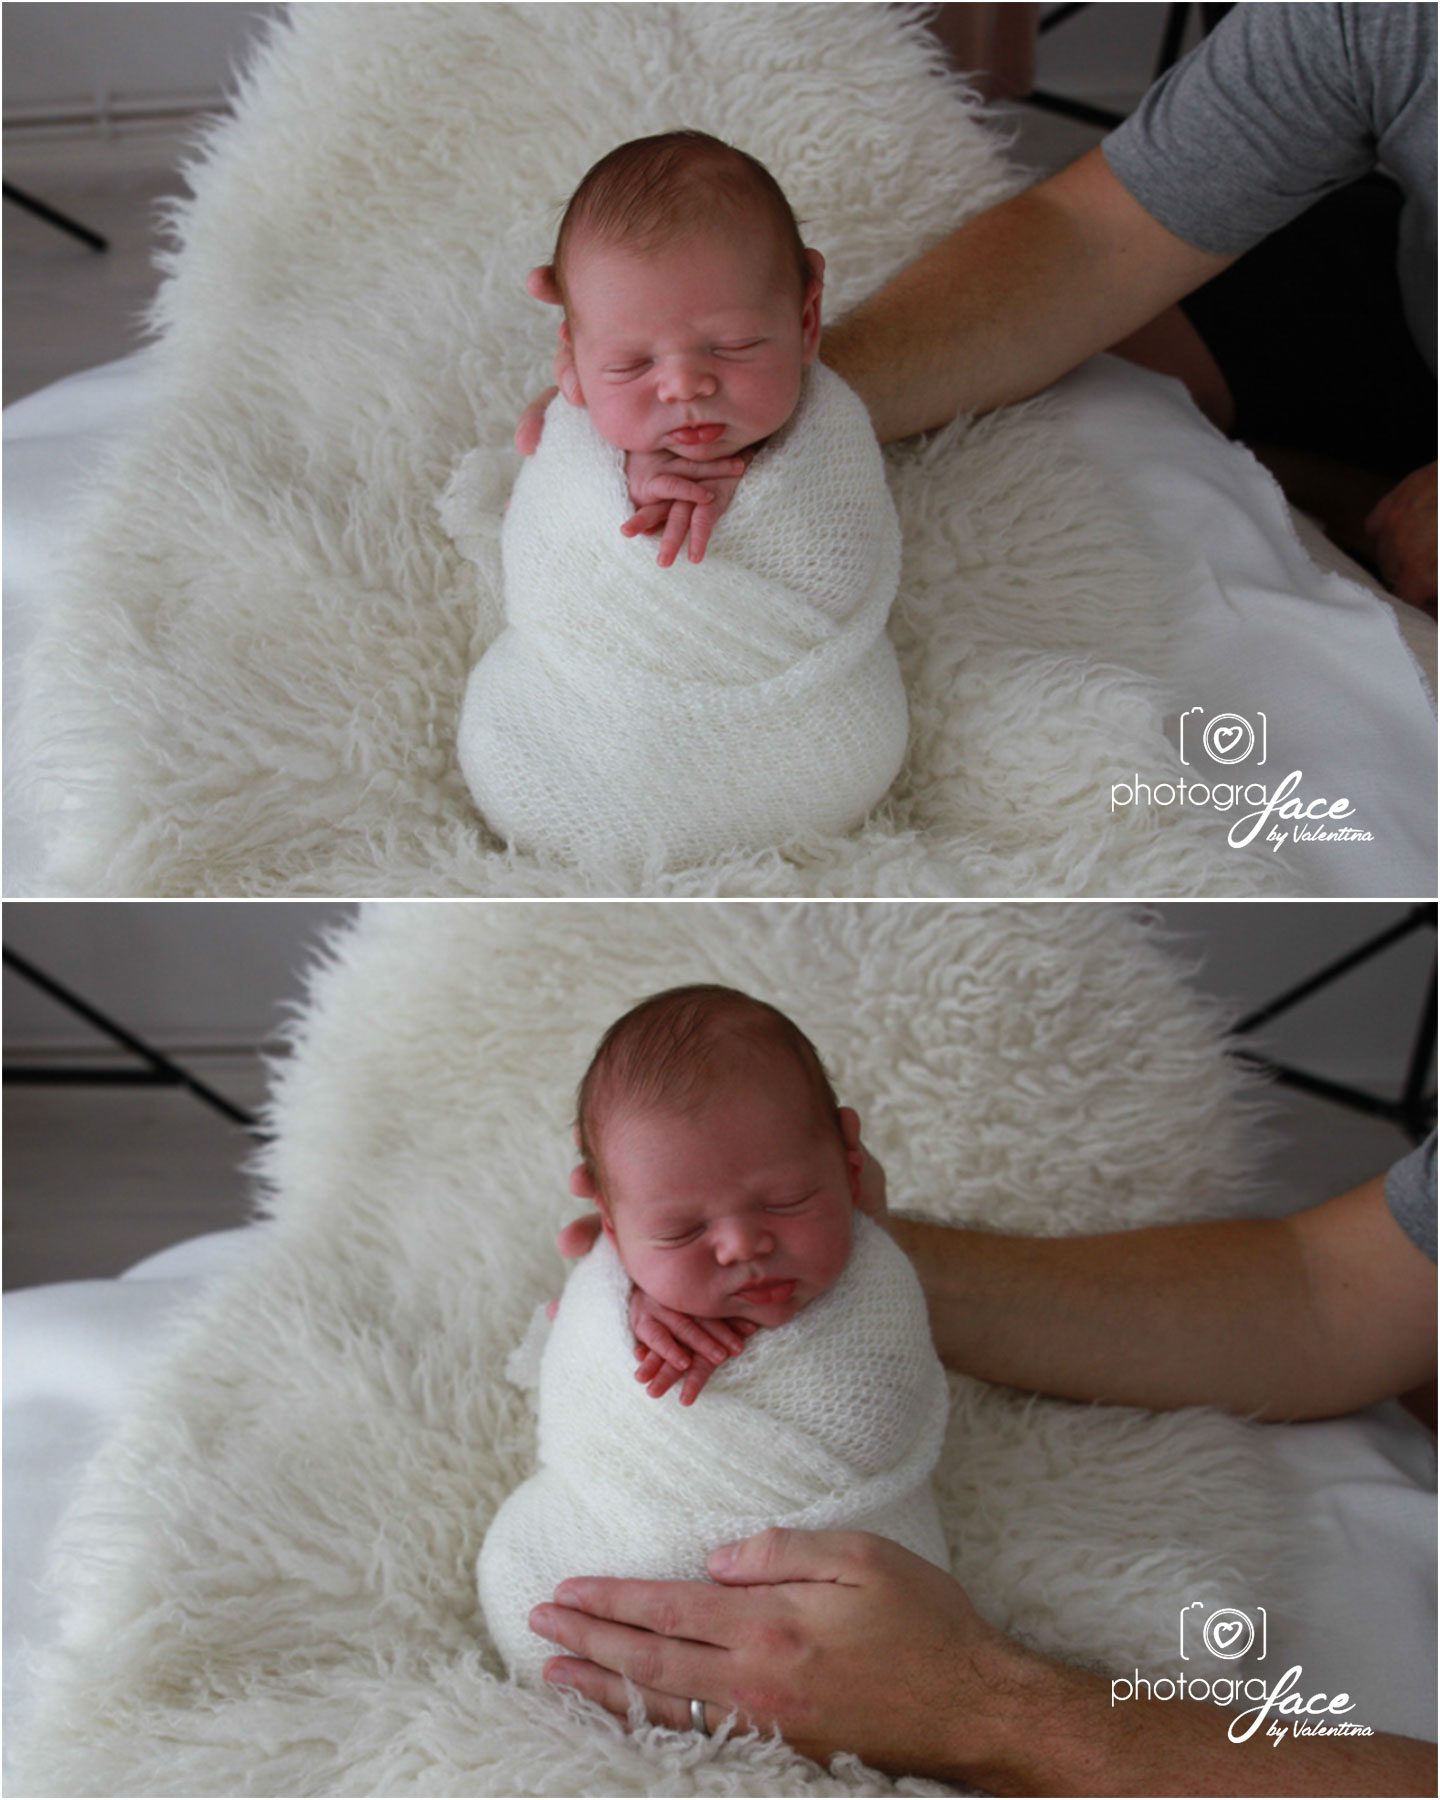 behind the scene photos os a newborn photography session